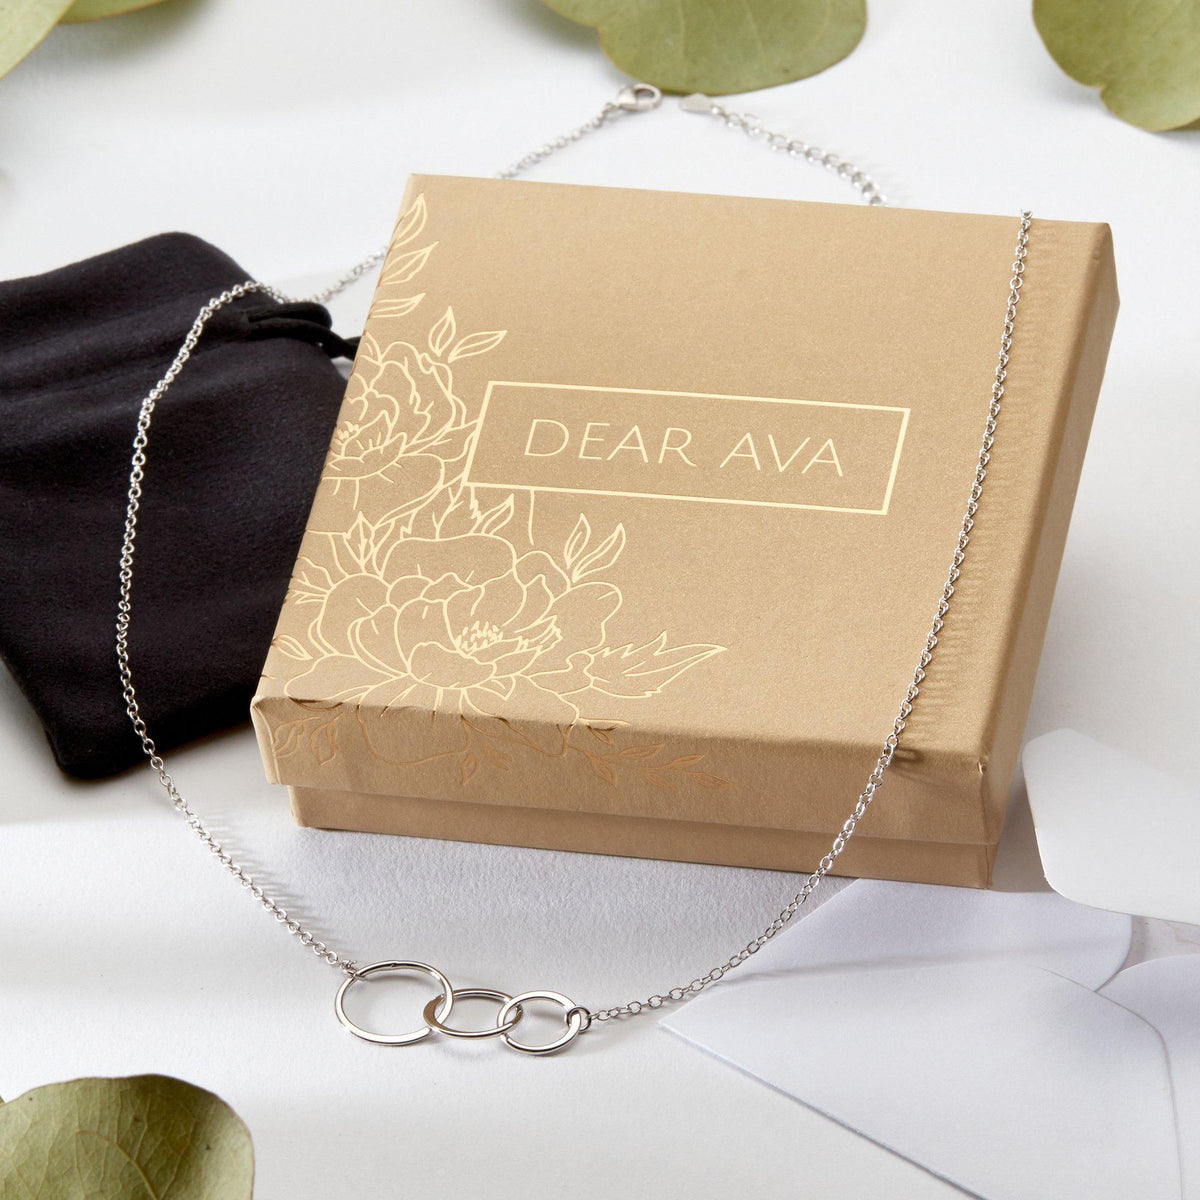 39th Birthday Necklace - Dear Ava, Jewelry / Necklaces / Pendants